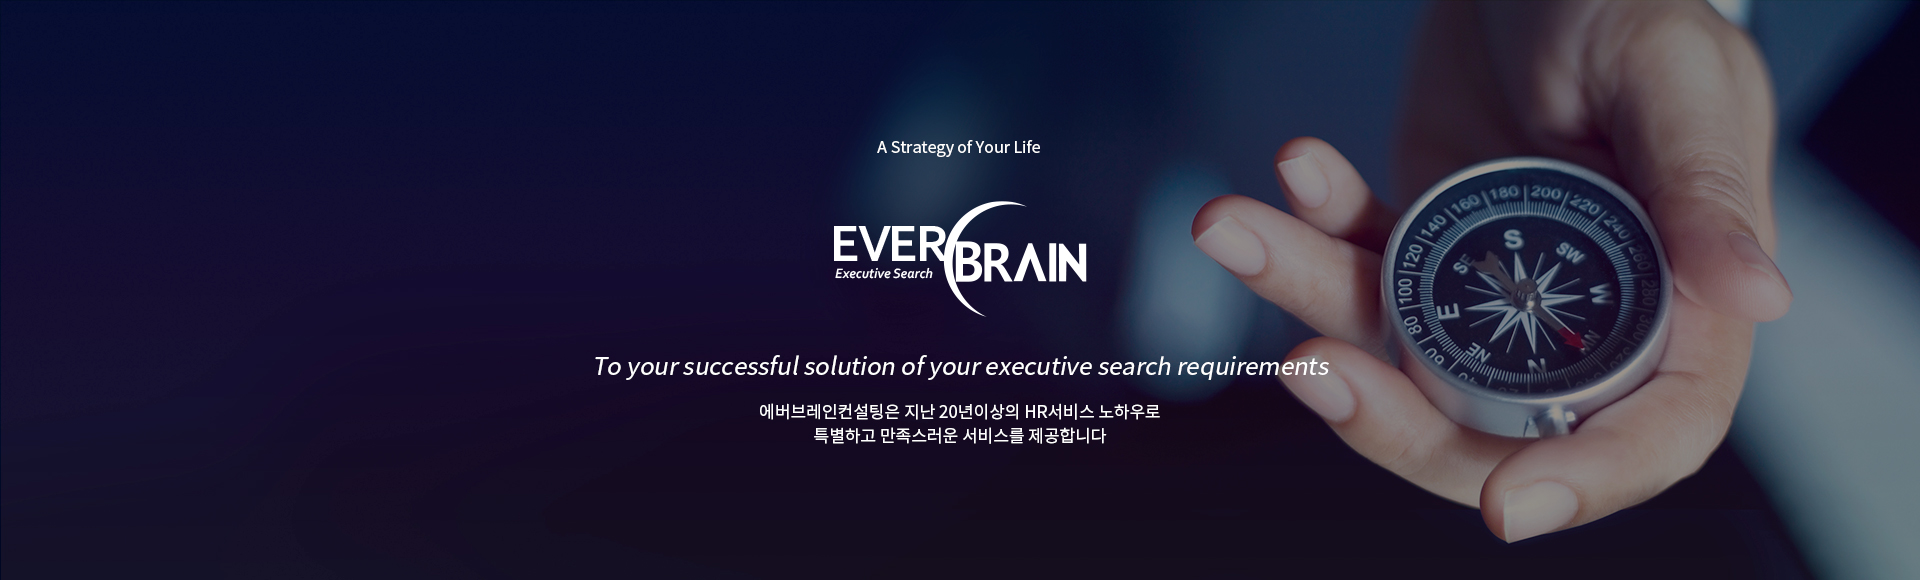 A Strategy of Your Life, EVERBRAIN. 에버브레인컨설팅은 지난 20년의 HR서비스 노하우로 특별하고 만족스러운 서비스를 제공합니다. To the successful solution of your executive search requirements in Korea.